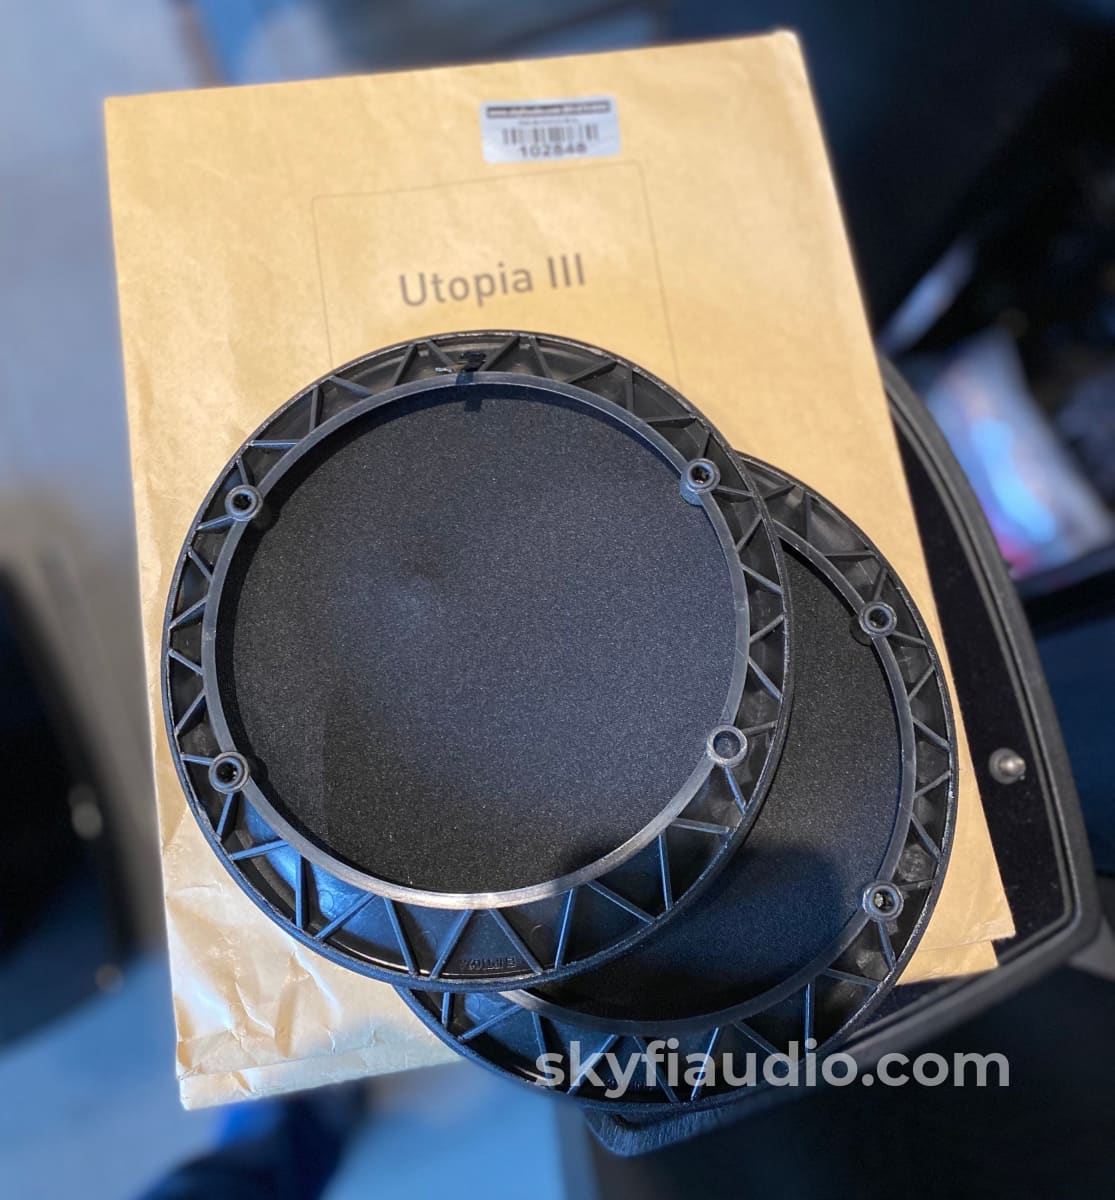 Focal Diablo Utopia Iii Speakers - As New And Complete With Stands $25K Msrp